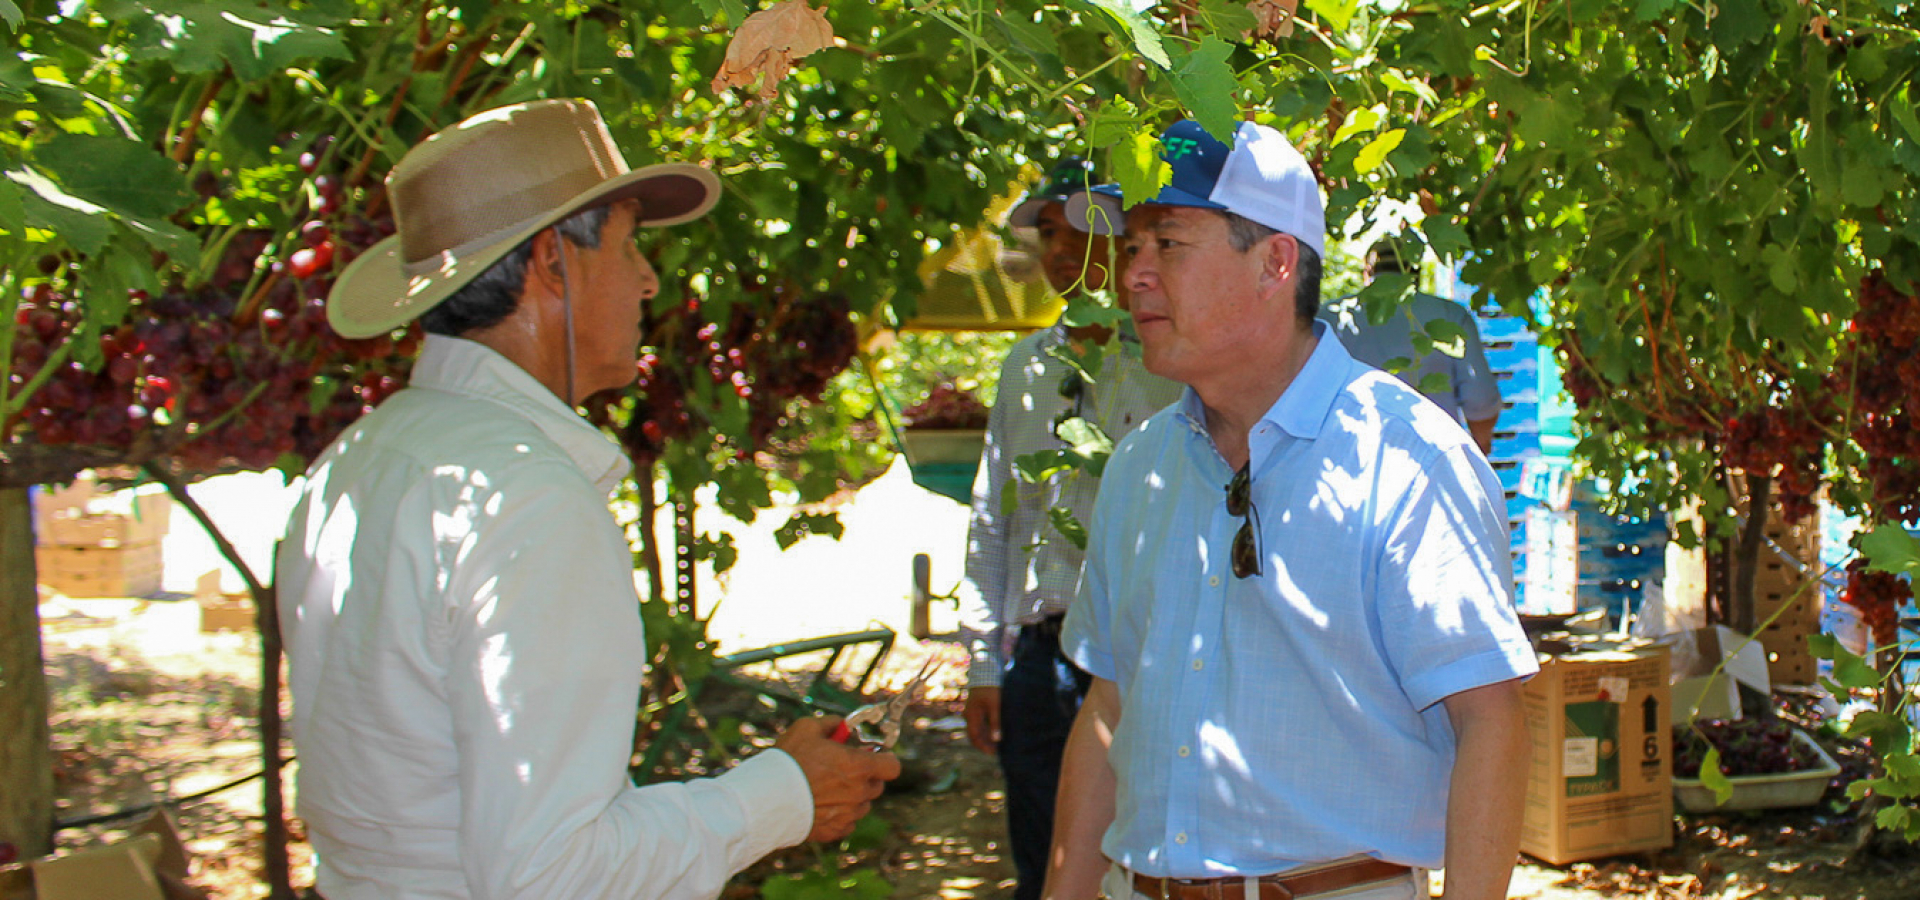 Rep. Cox at grape harvest, speaking with farmer